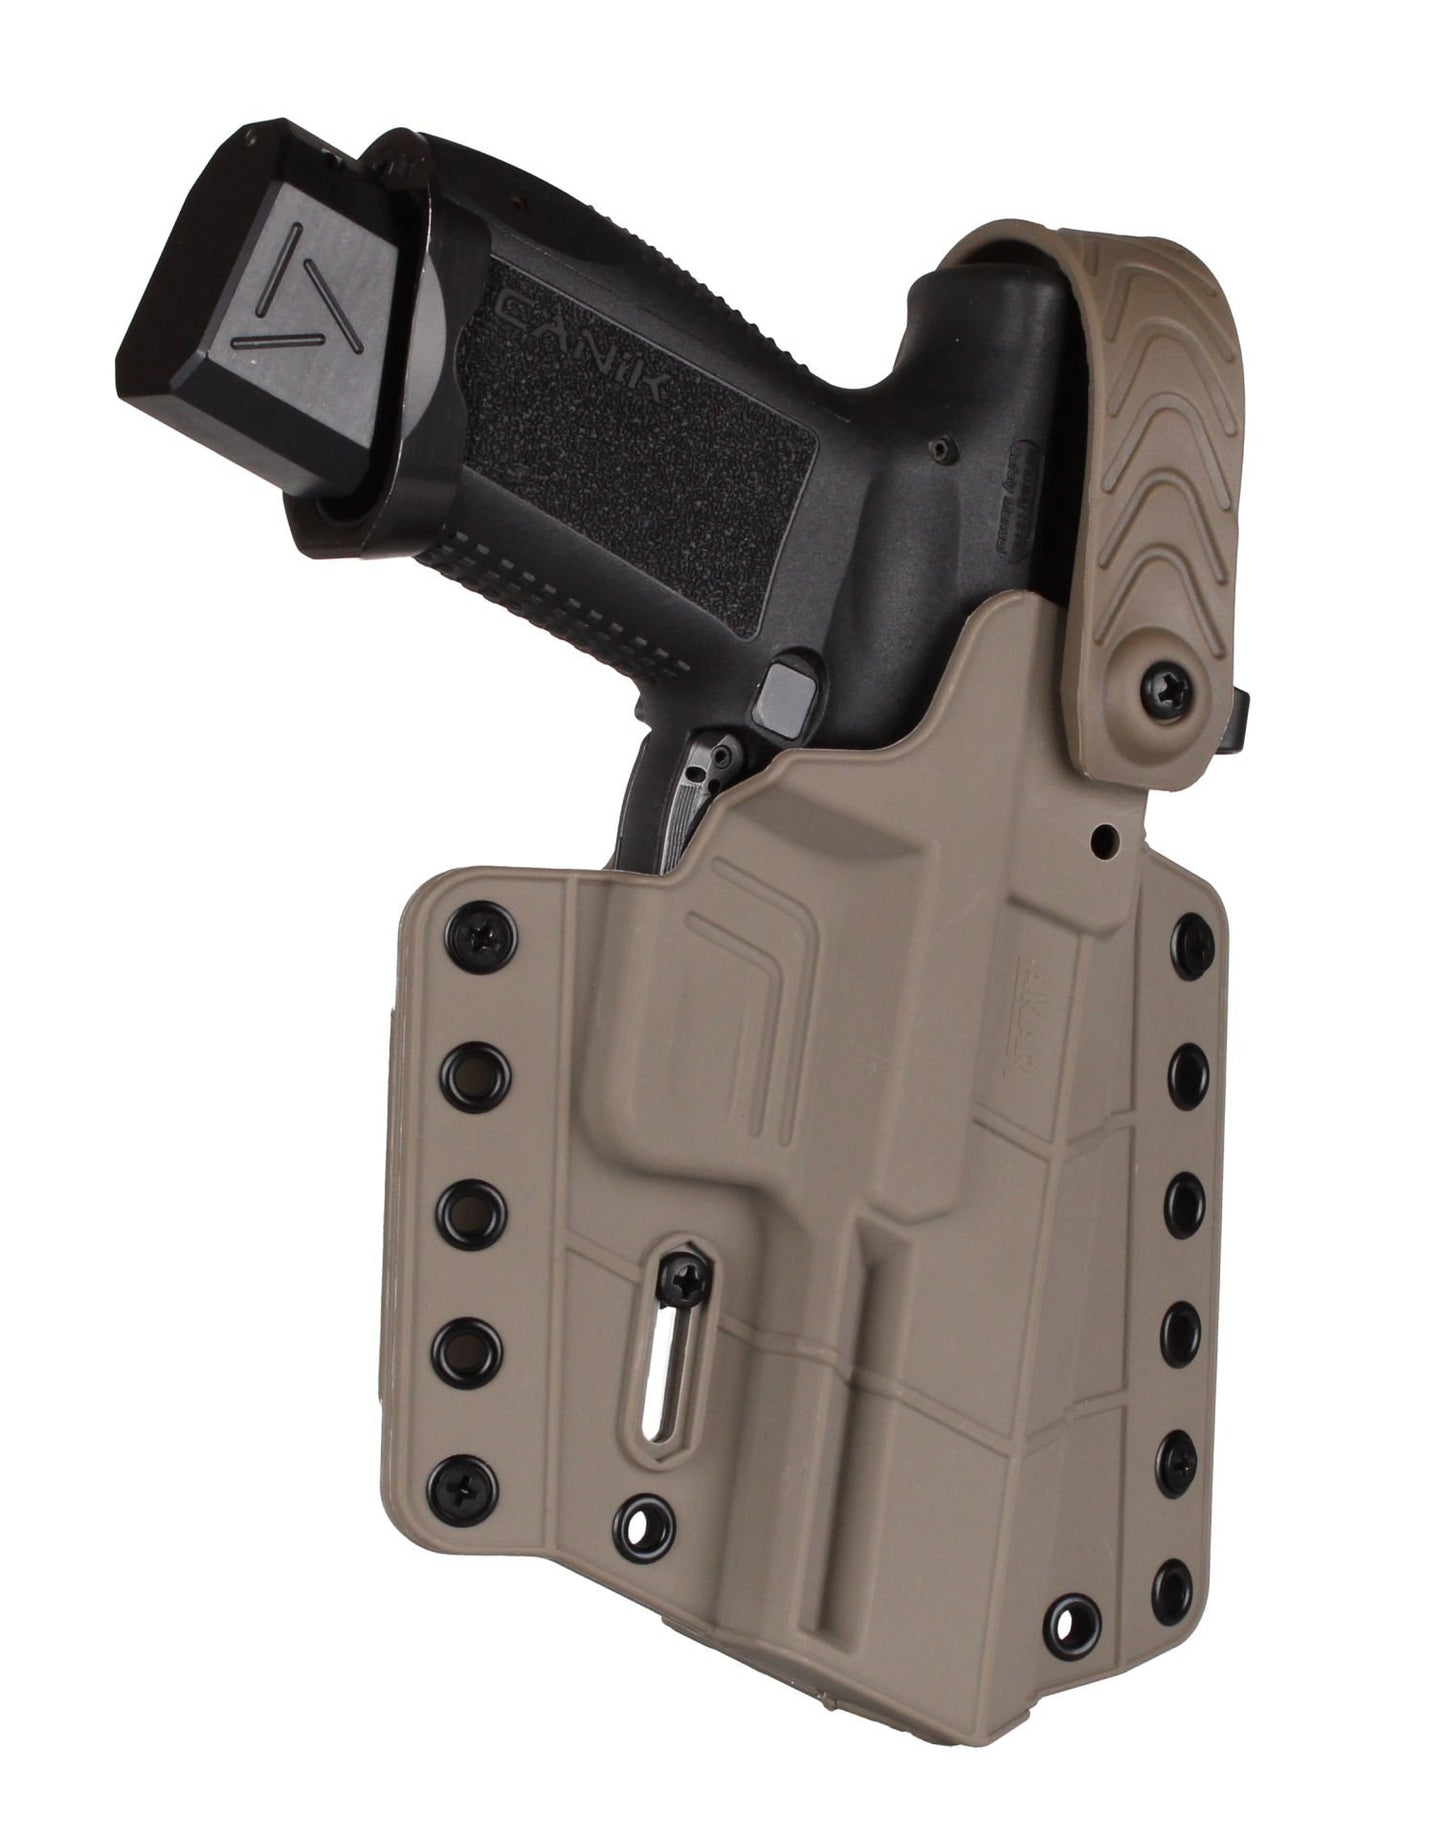 OWB Holster Compatible with Canik TP9 Series, TP9DA, TP9SA MOD.2, TP9SF, TP9SF Elite-S, TP9SA, Outside Waistband Carry Holster with Level II Retention, Closed Lock System